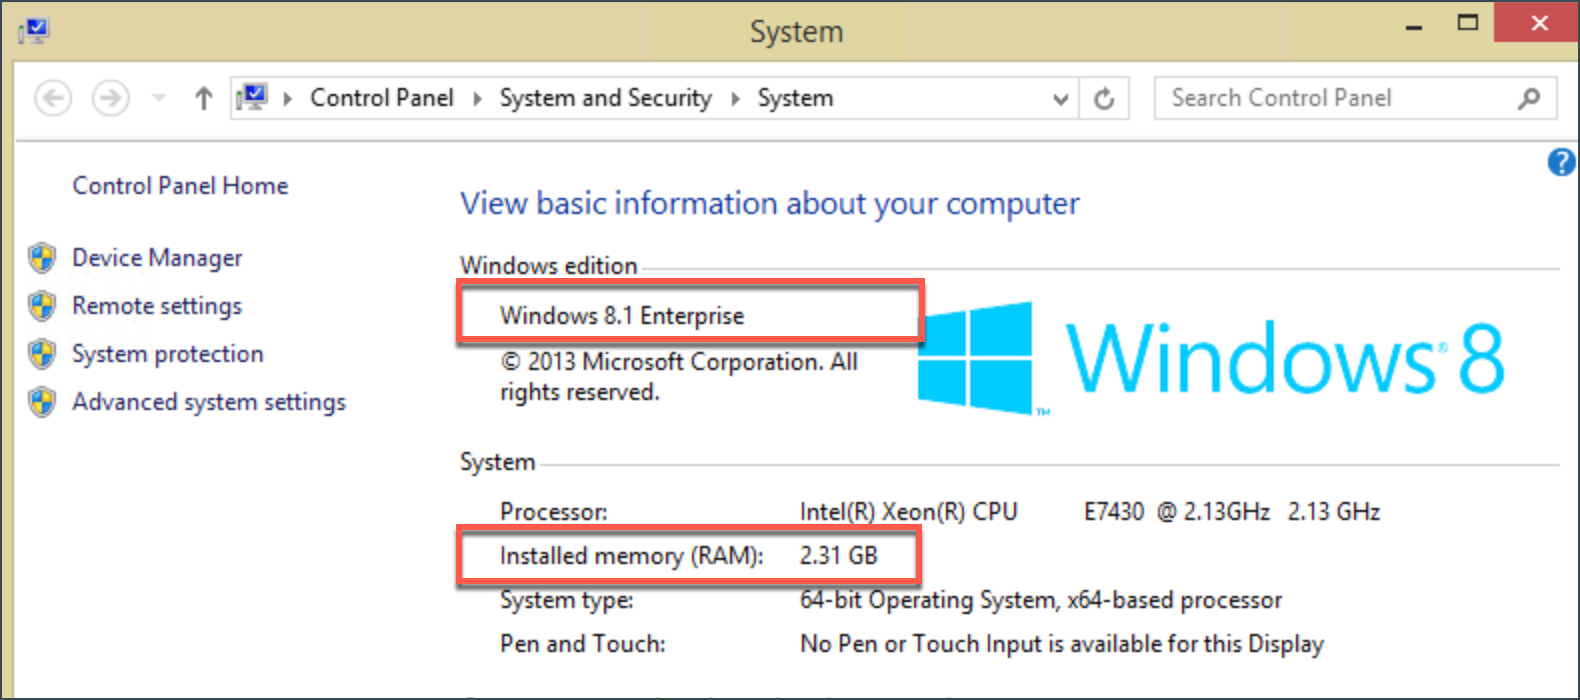 How to check System Requirements on Windows 8.1